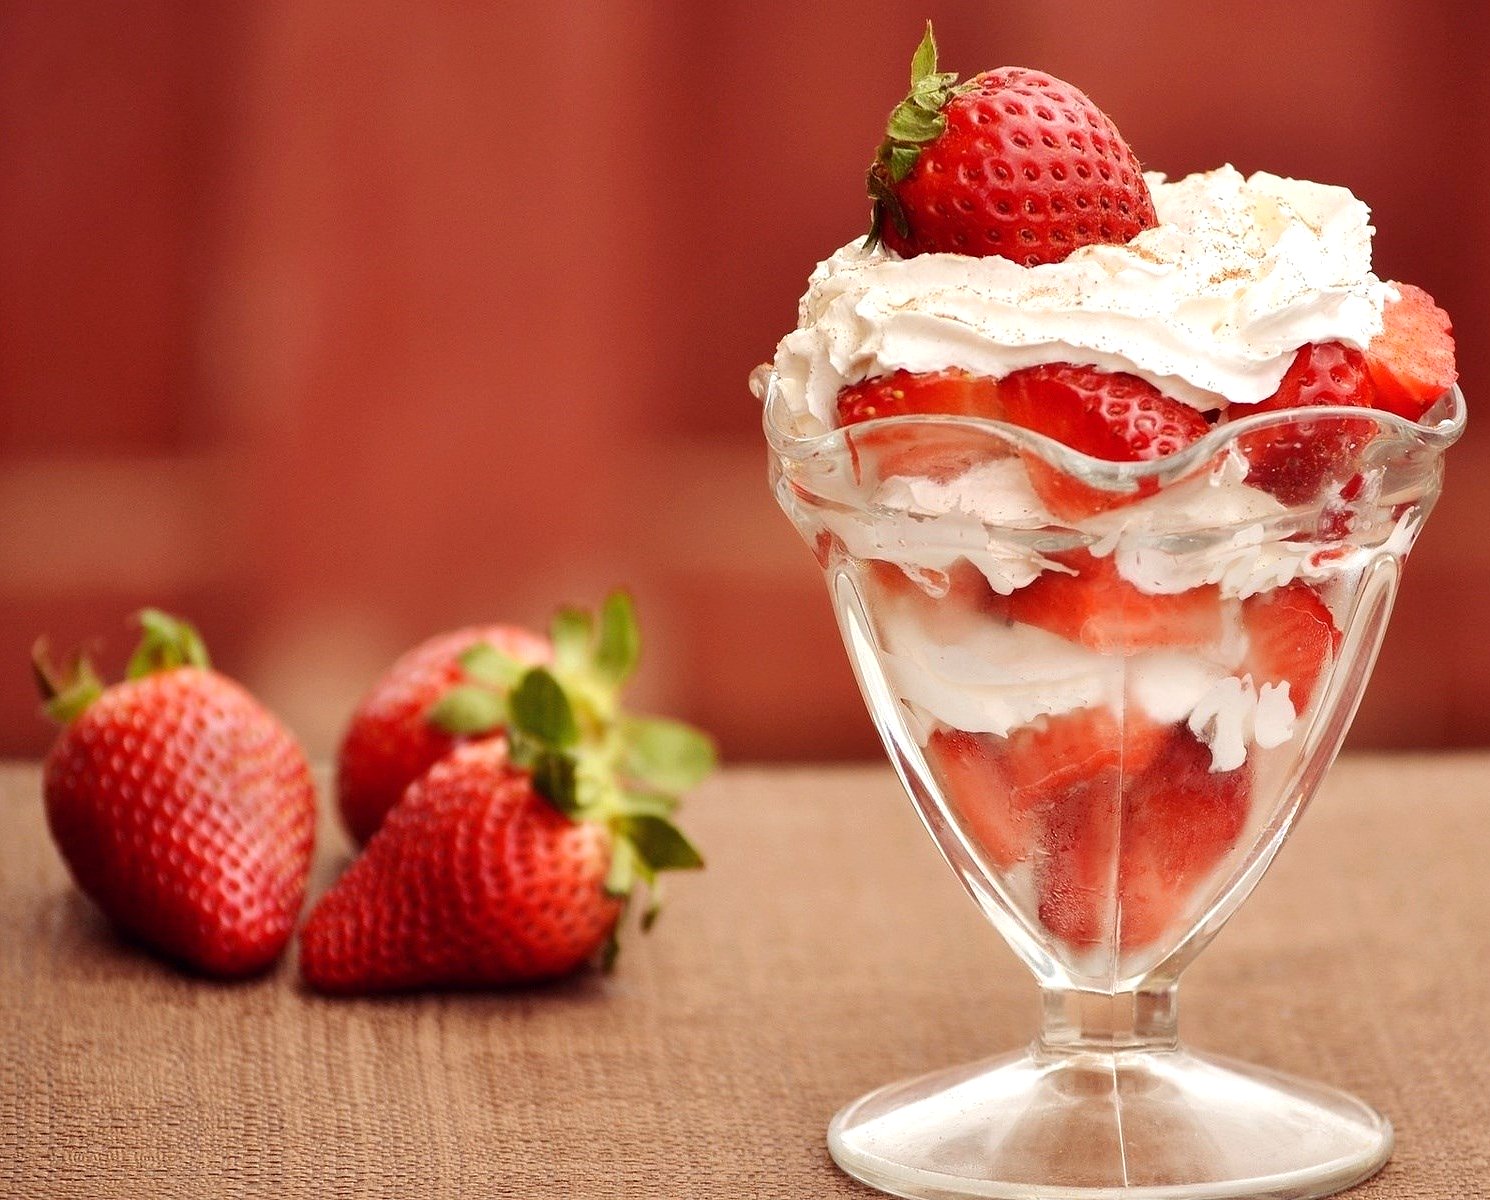 Strawberries and Cream Google image http://cookdiary.net/wp-content/uploads/images/Strawberries-and-Cream_12310.jpg